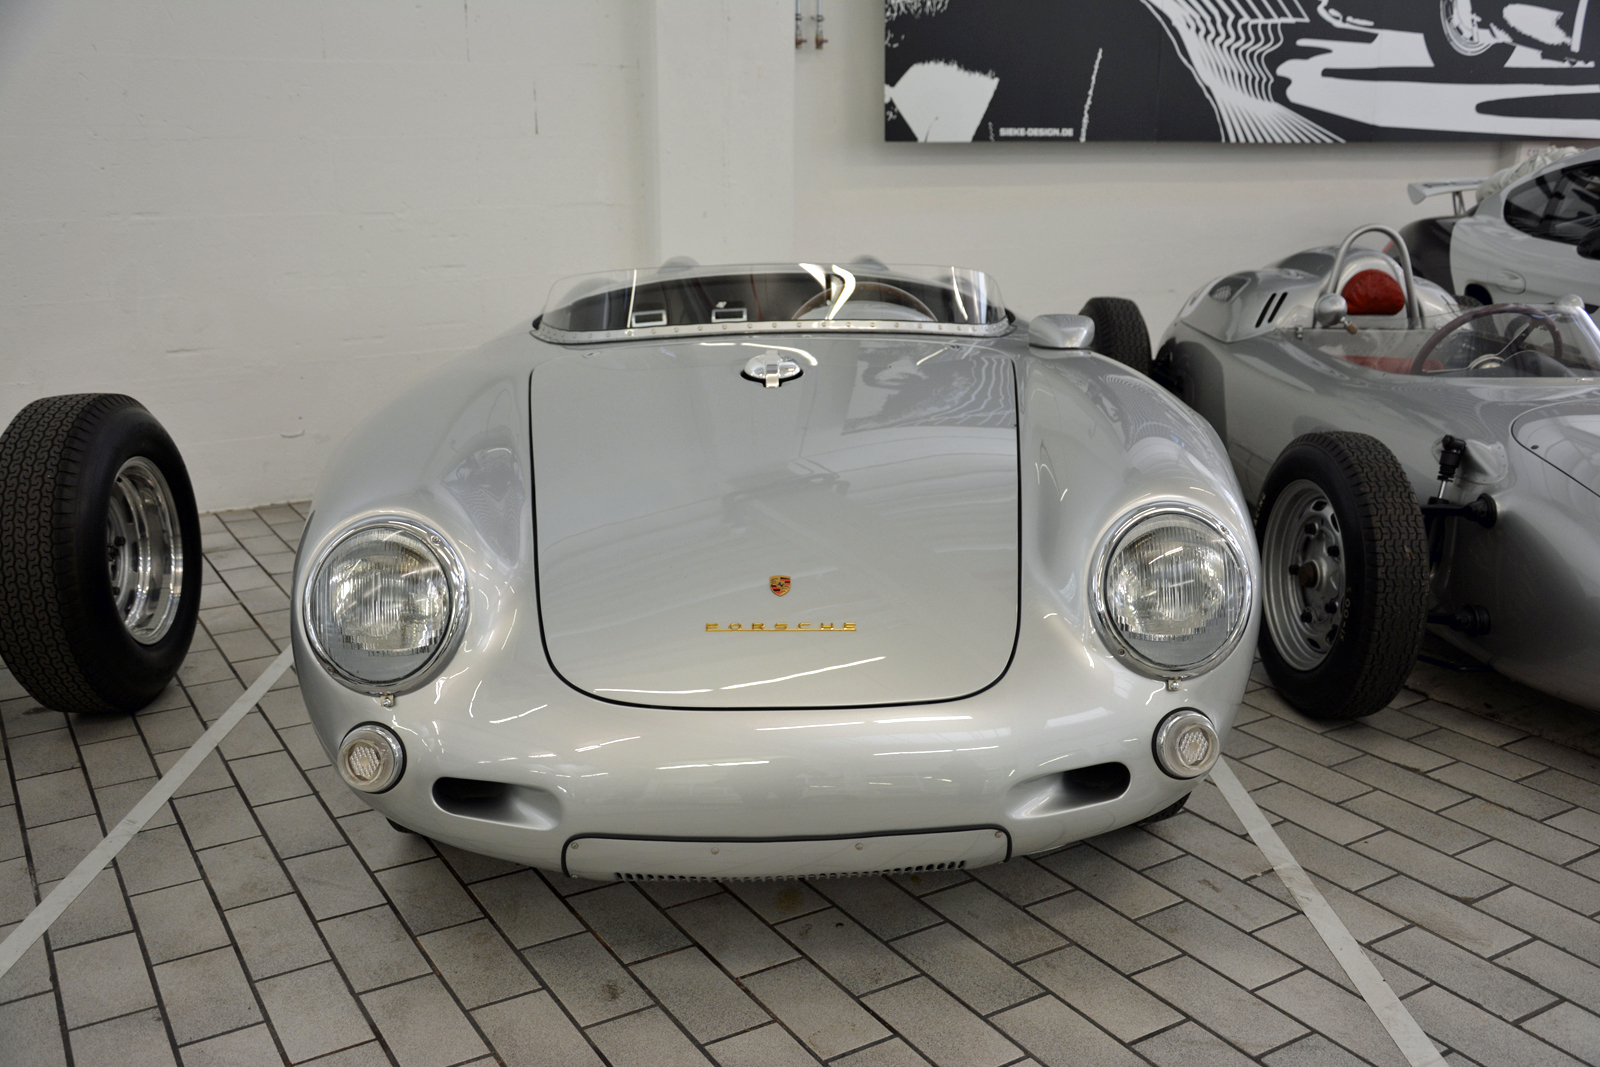 <p>Porsche’s 550 Spyder was designed for racing. Stuffing a <strong>110 hp</strong> flat-four engine in a 1197 lb car was a recipe for victory, and the 550 Spyder became one of the most successful race cars of the 1950s. It continued winning races for years after production stopped.</p><p>While its racing pedigree is far from forgotten today, the 550 Spyder is more often associated with showbusiness than racing due to its unwished-for connection to the 1955 death of American actor <strong>James Dean</strong>. </p>